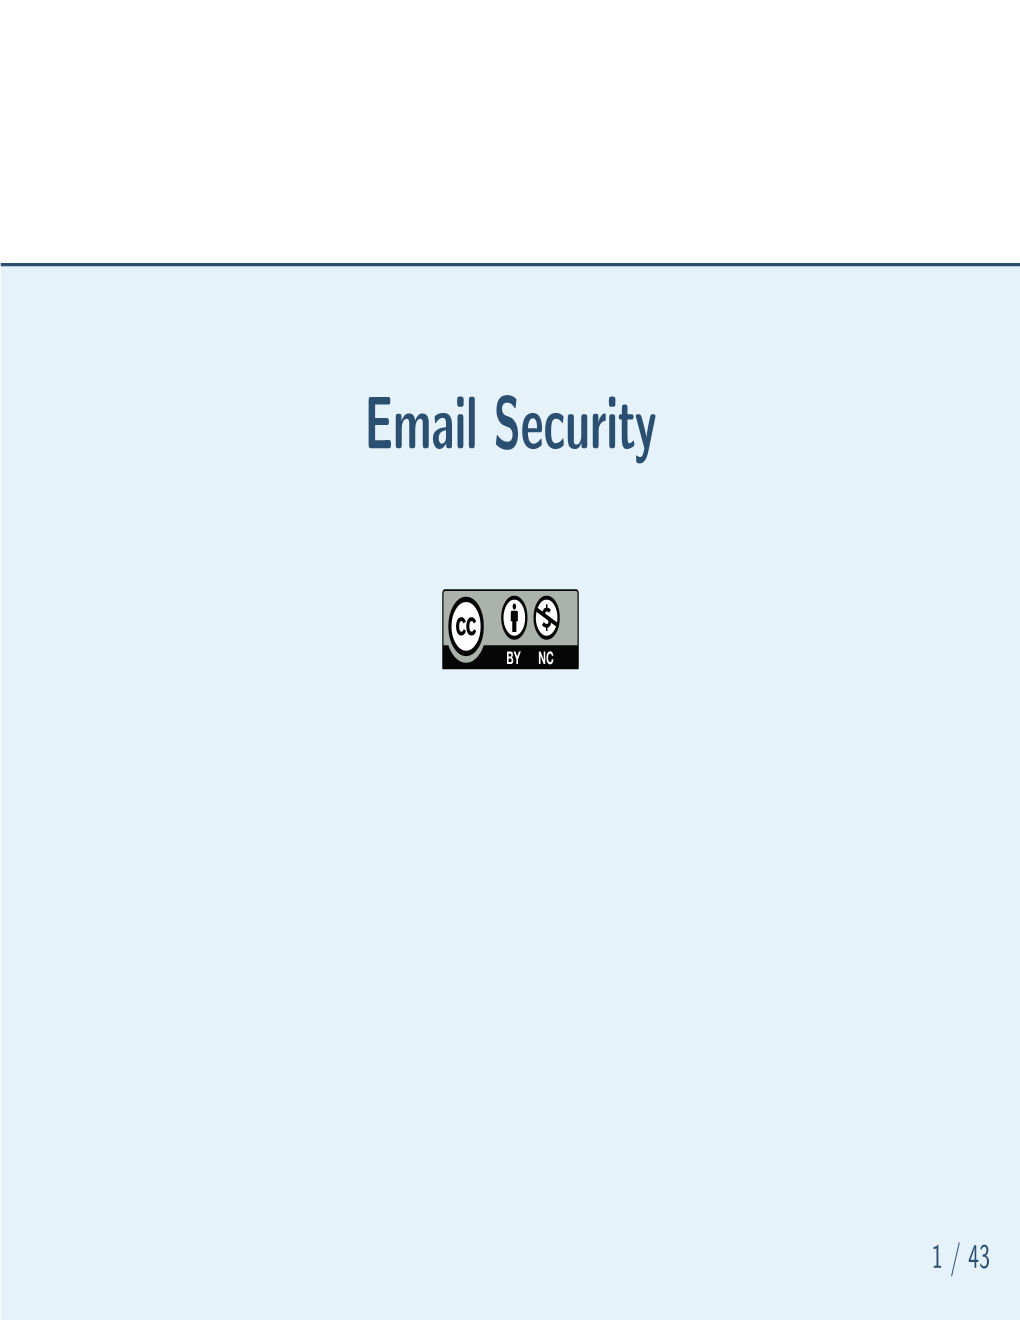 Email Security II